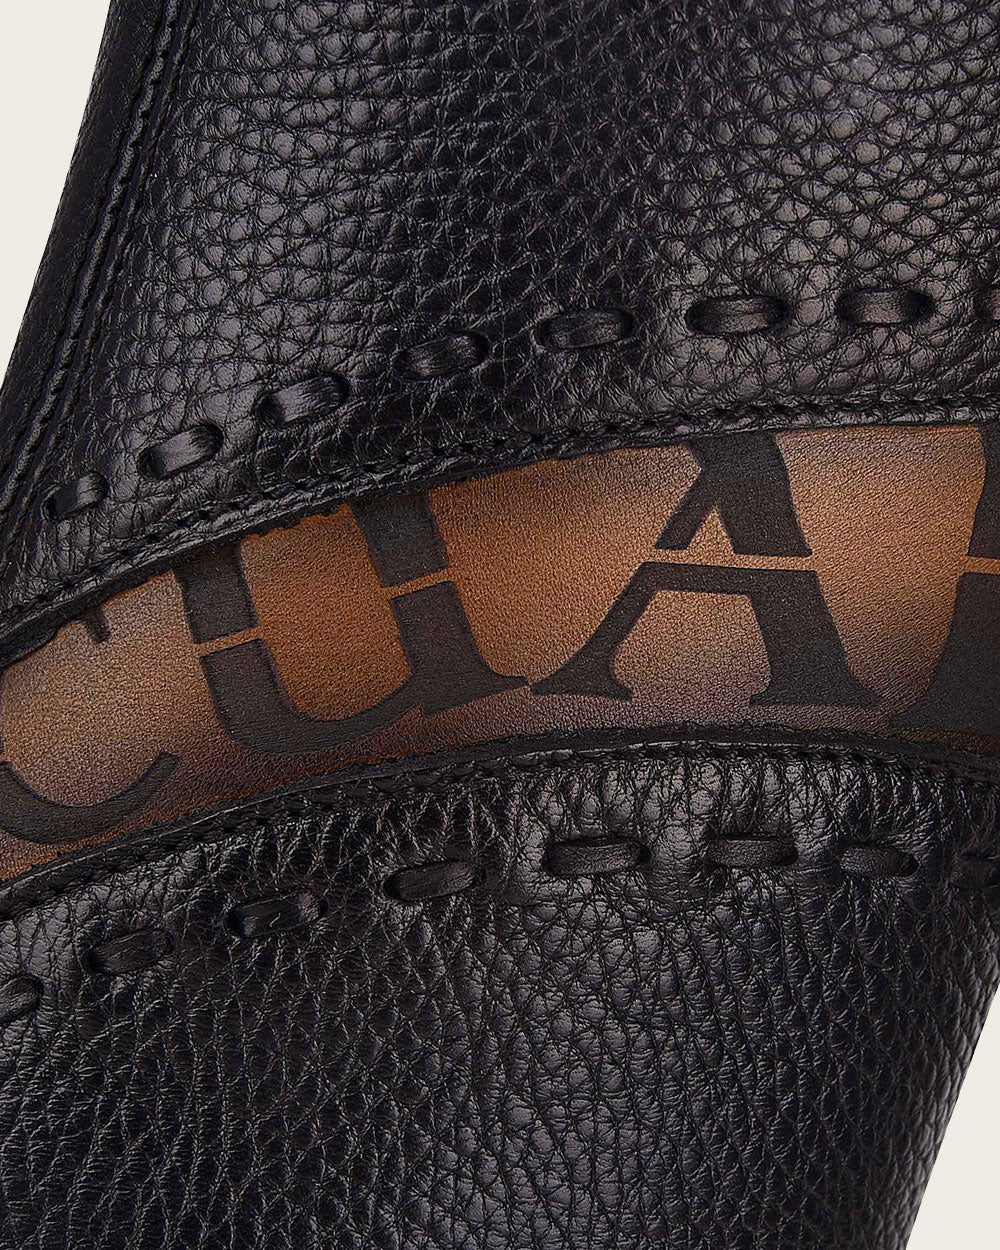 Laser-Etched Cuadra Logo: Elevate your brown leather boots with brand recognition. 